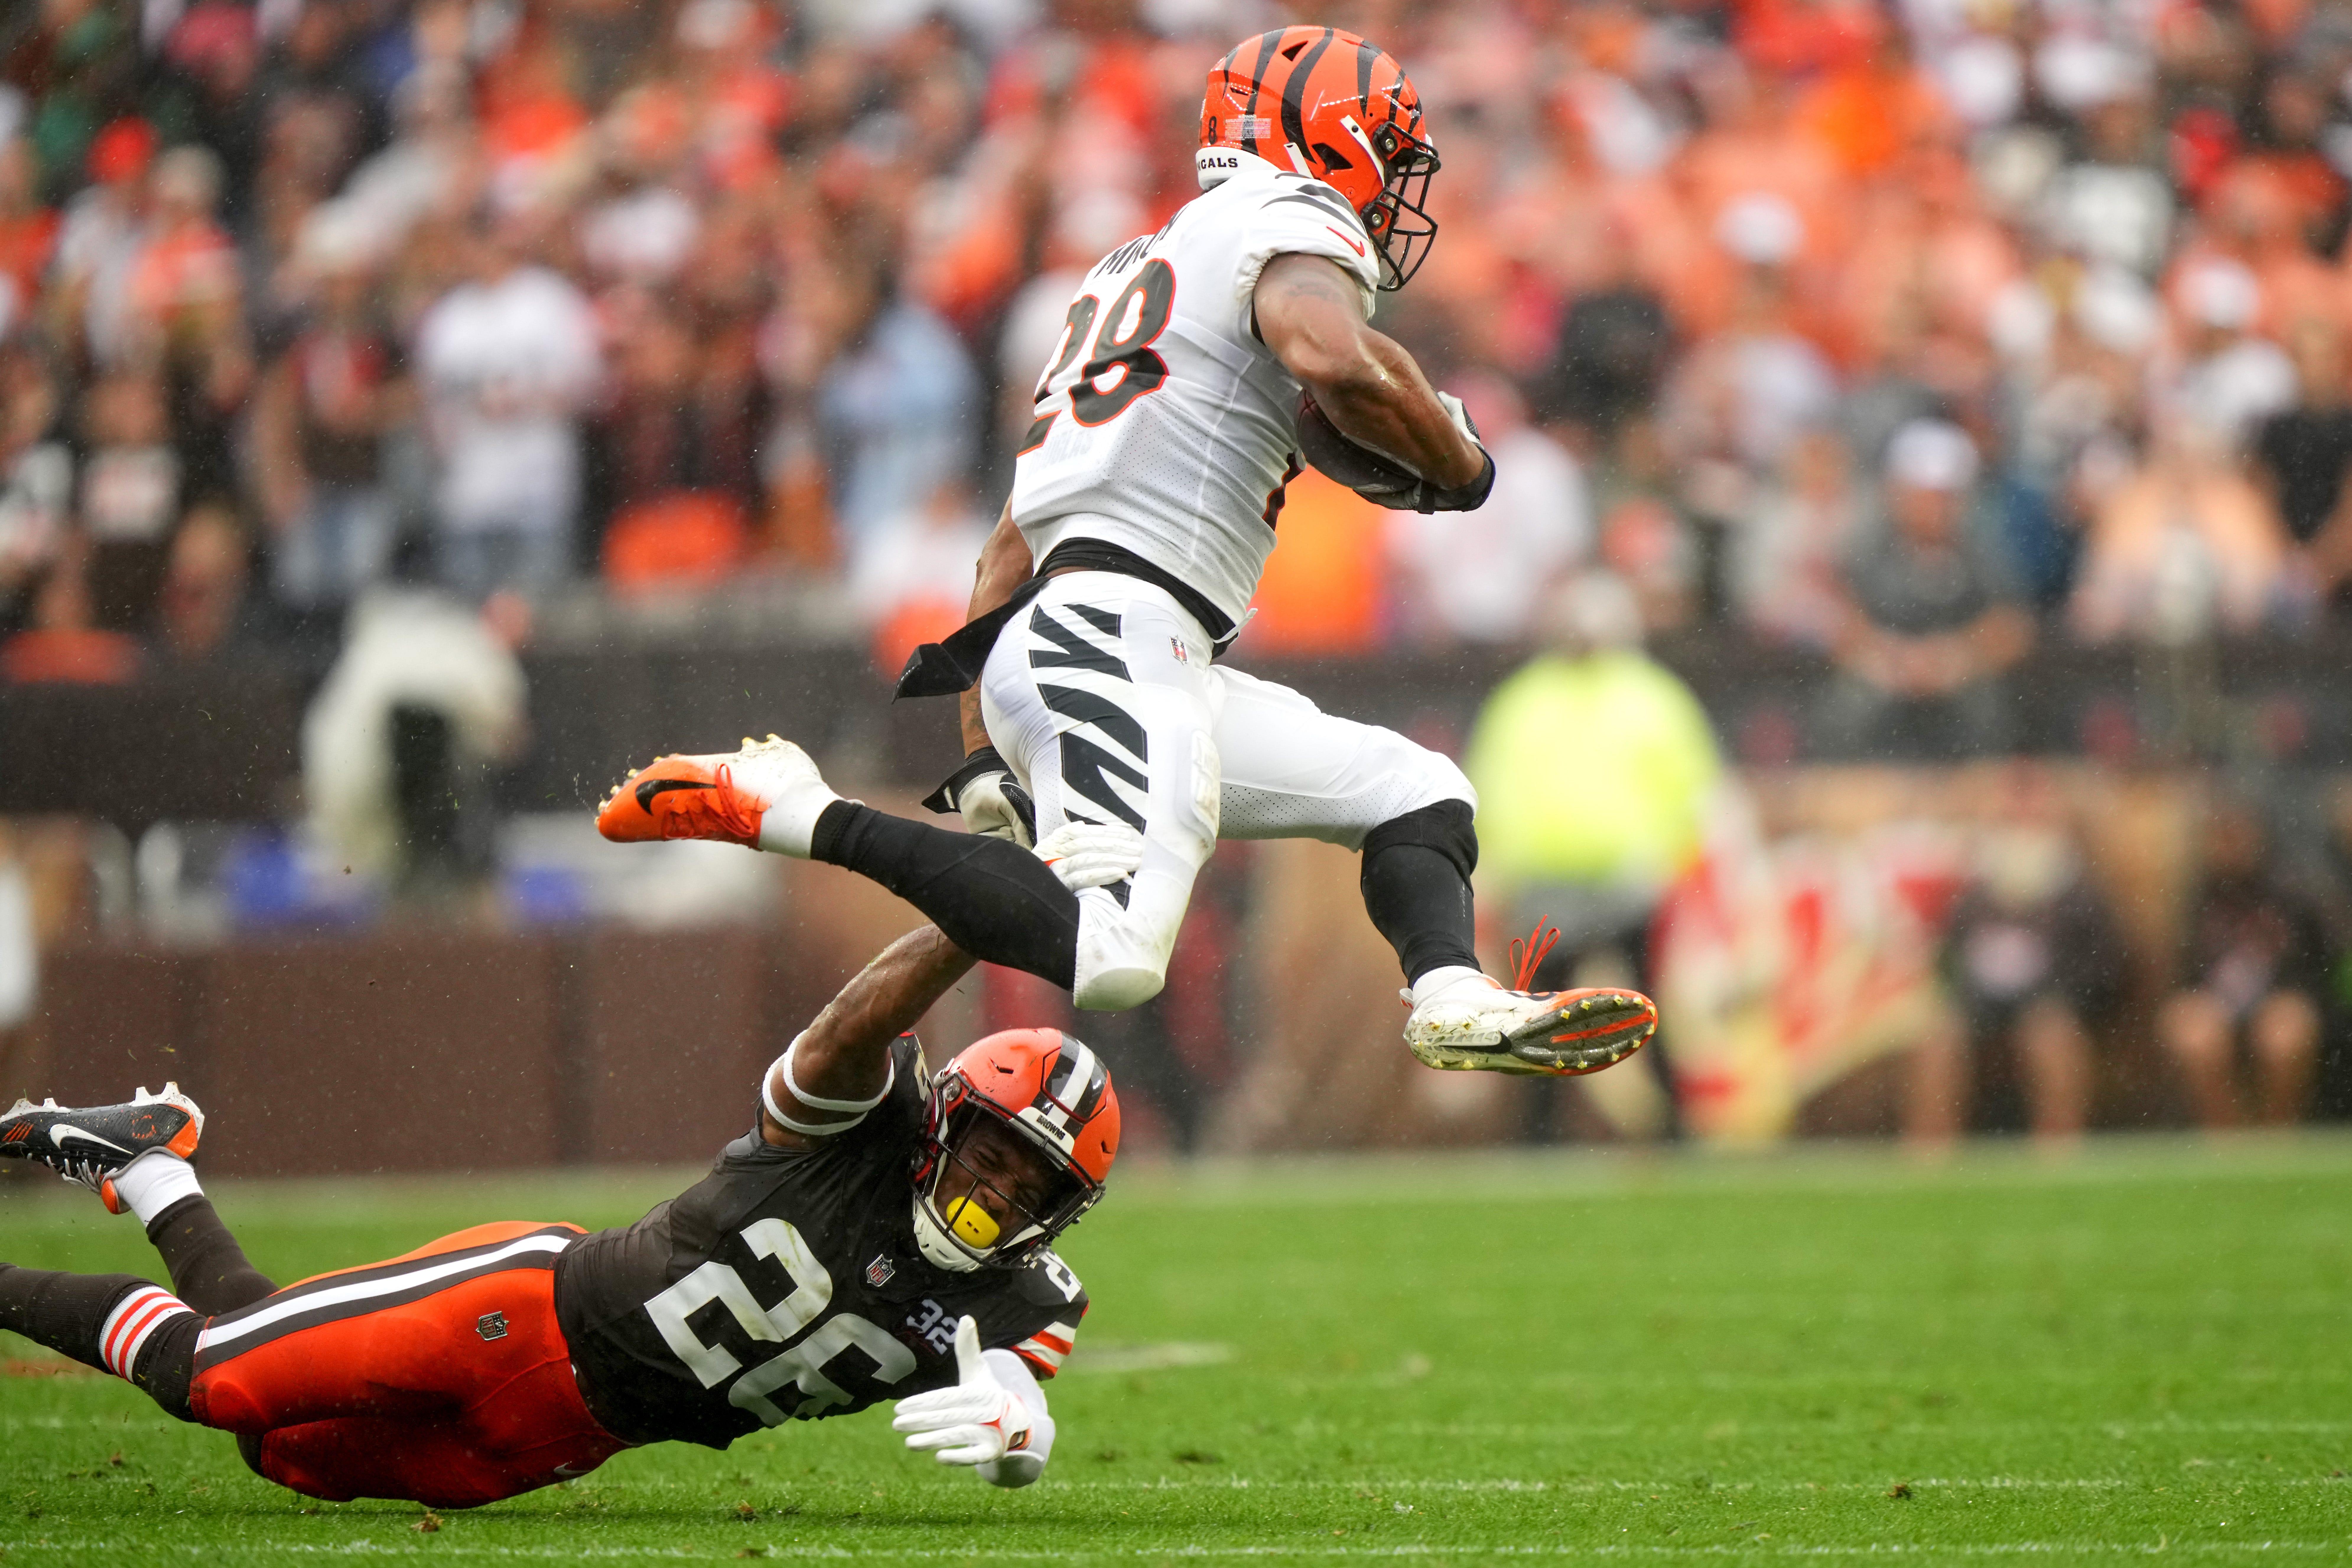 The Cincinnati Bengals (8-8) will take on the Cleveland Browns (11-5) at Paycor Stadium on Sunday, Jan. 7. Kickoff is set for 1 p.m. ET.